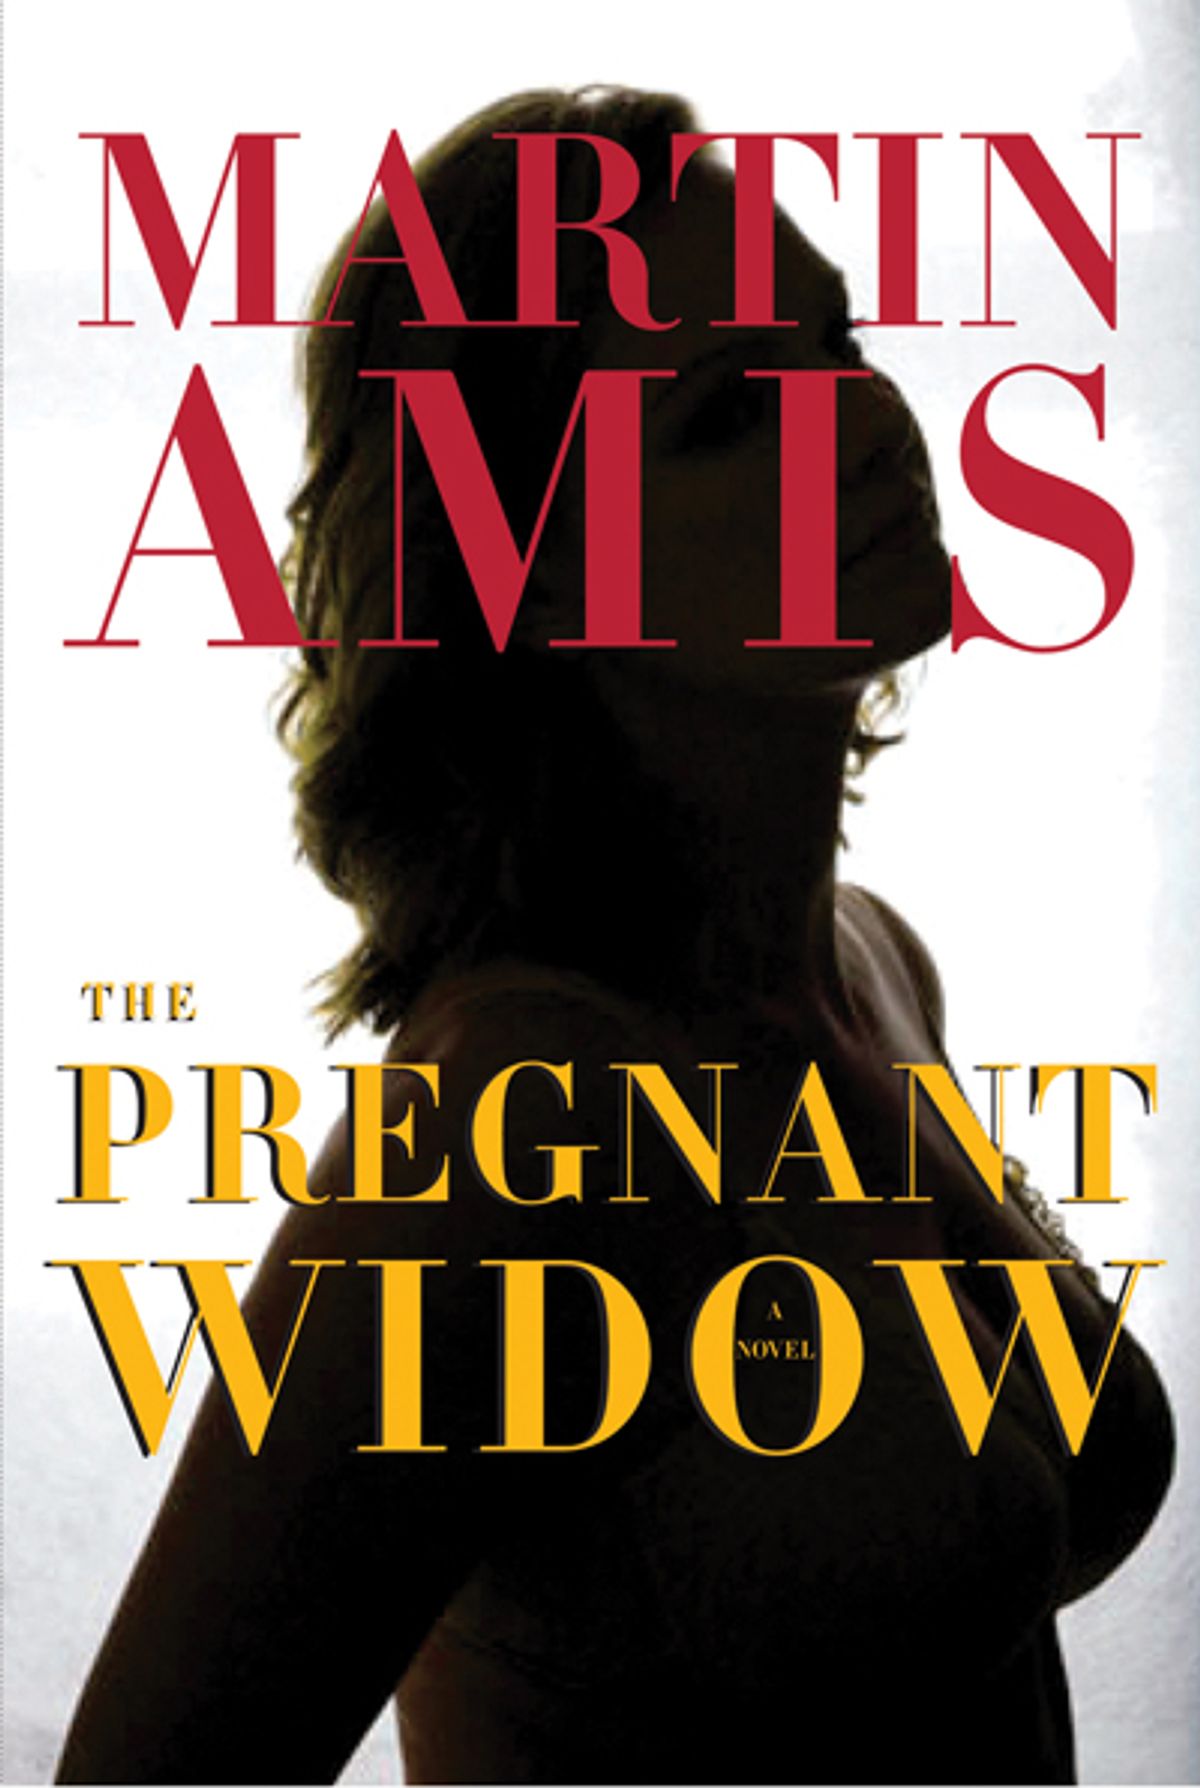 "The Pregnant Widow" by Martin Amis    